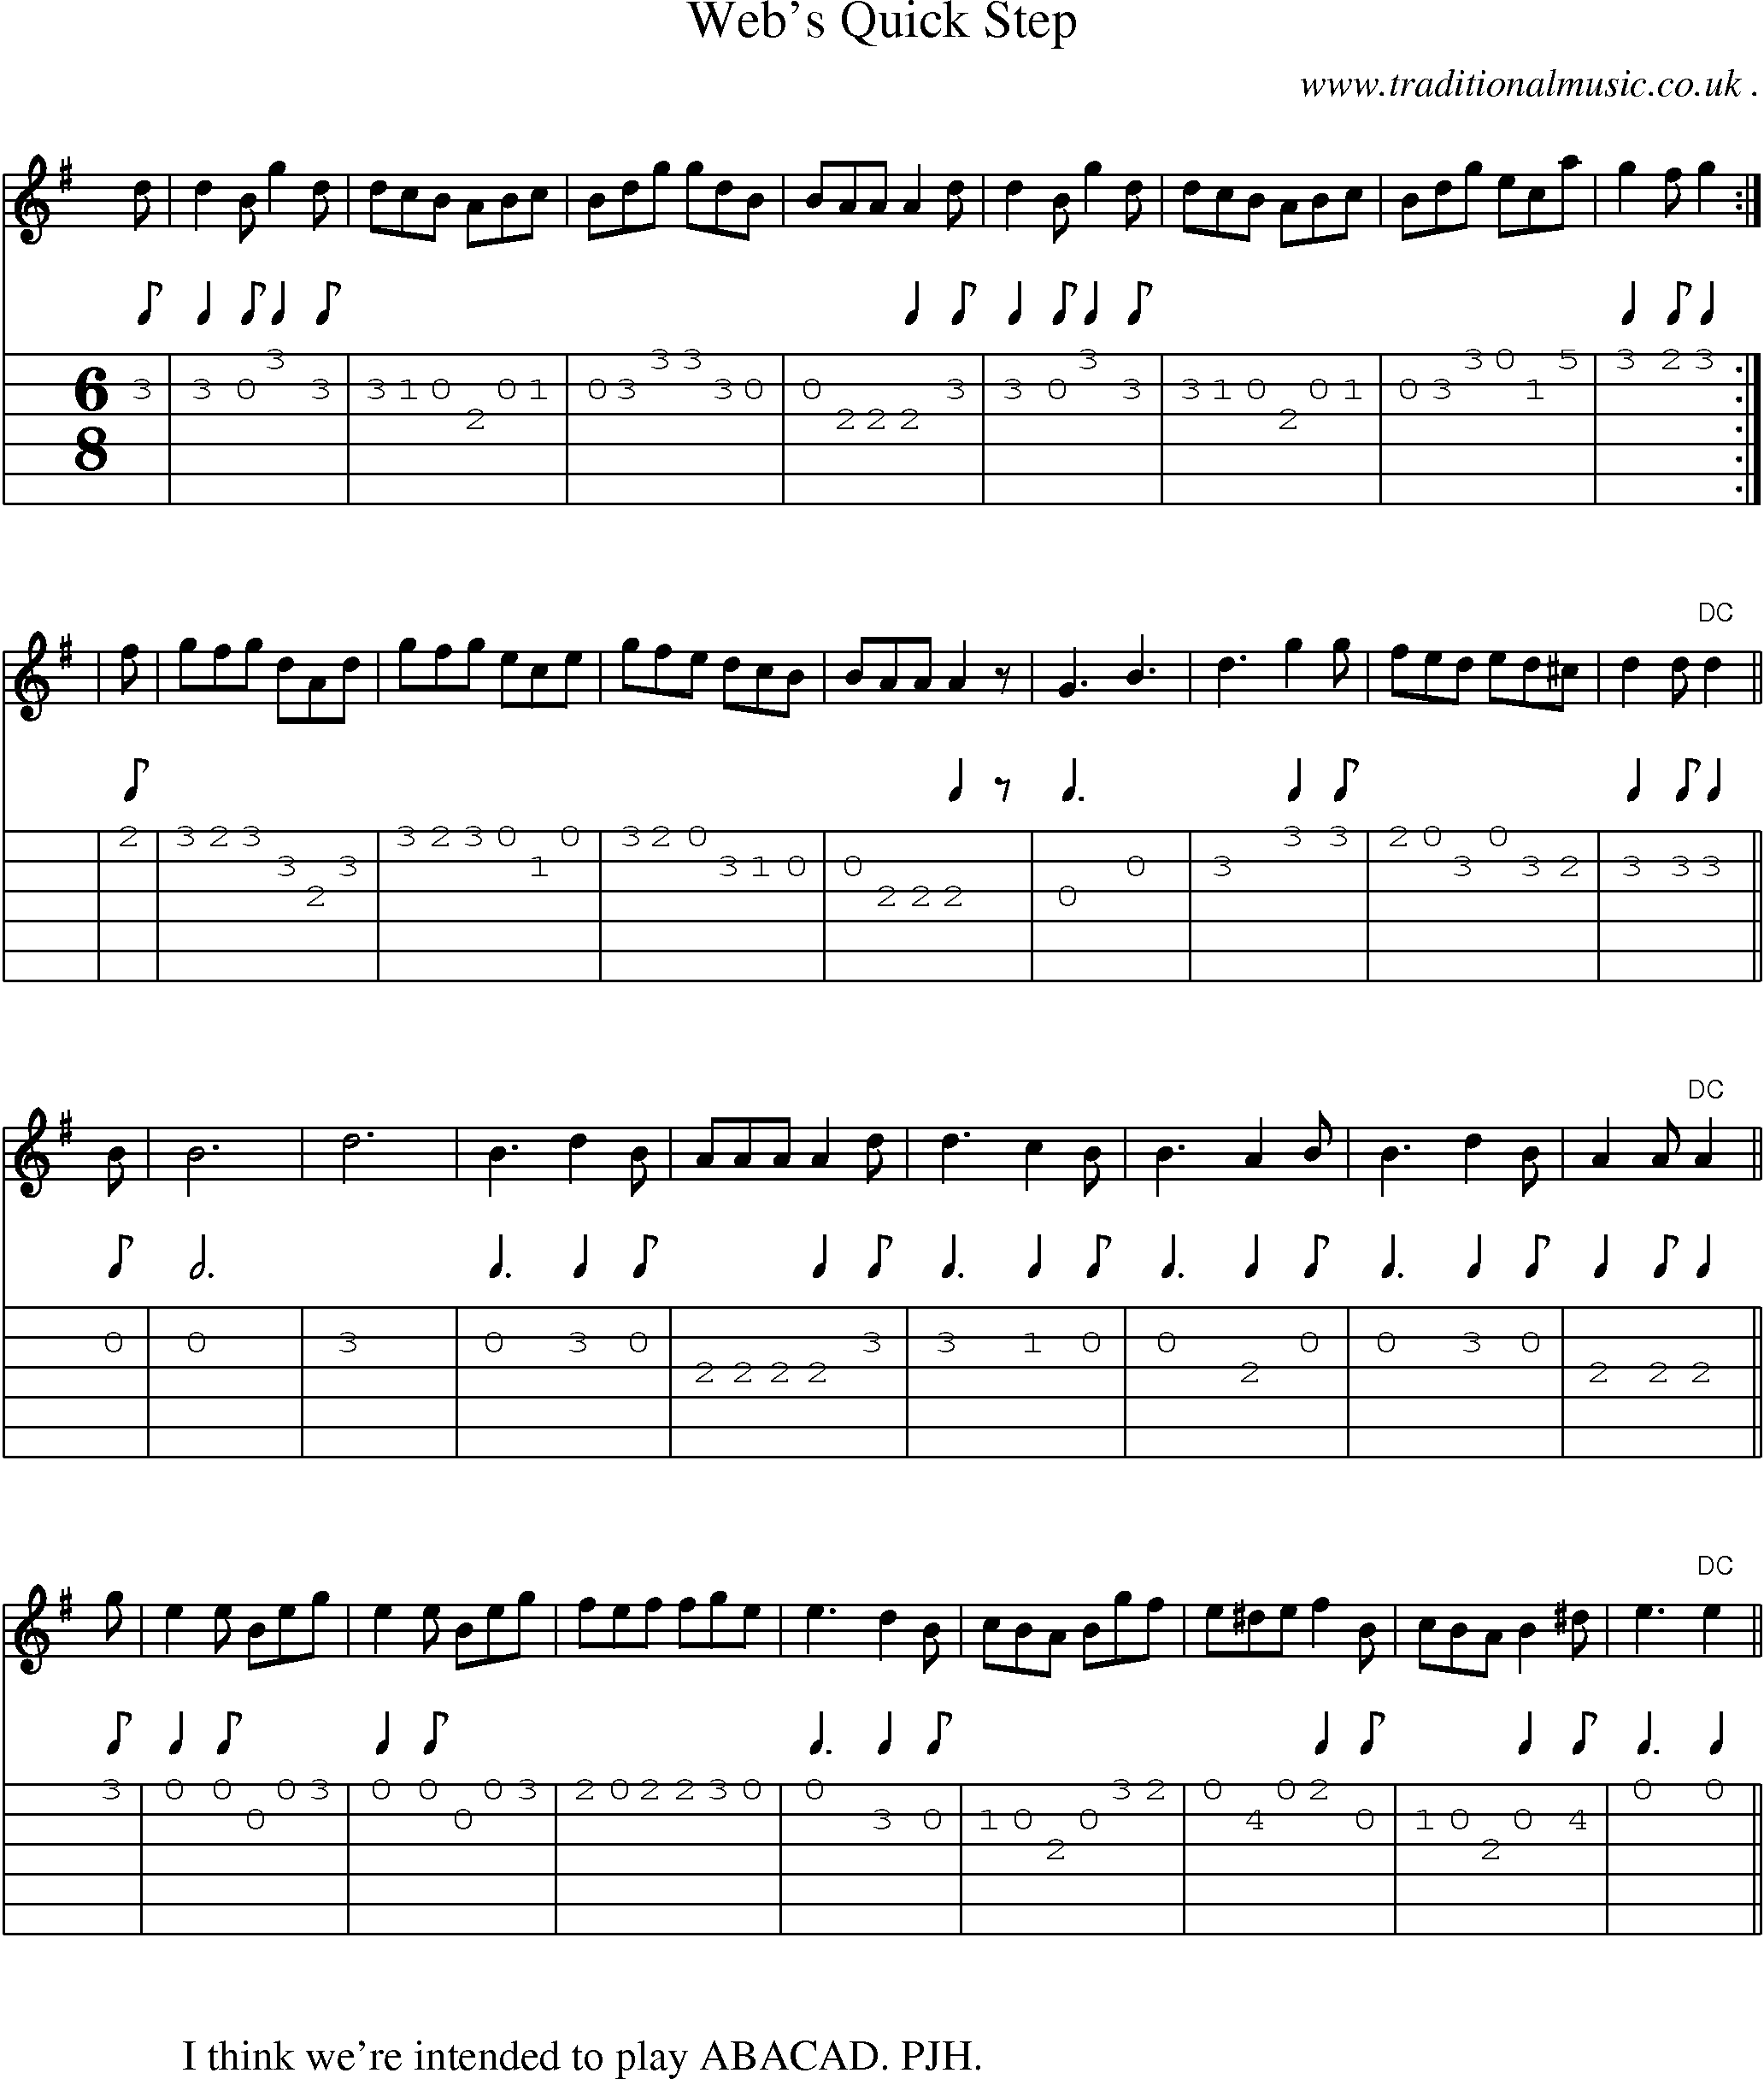 Sheet-Music and Guitar Tabs for Webs Quick Step